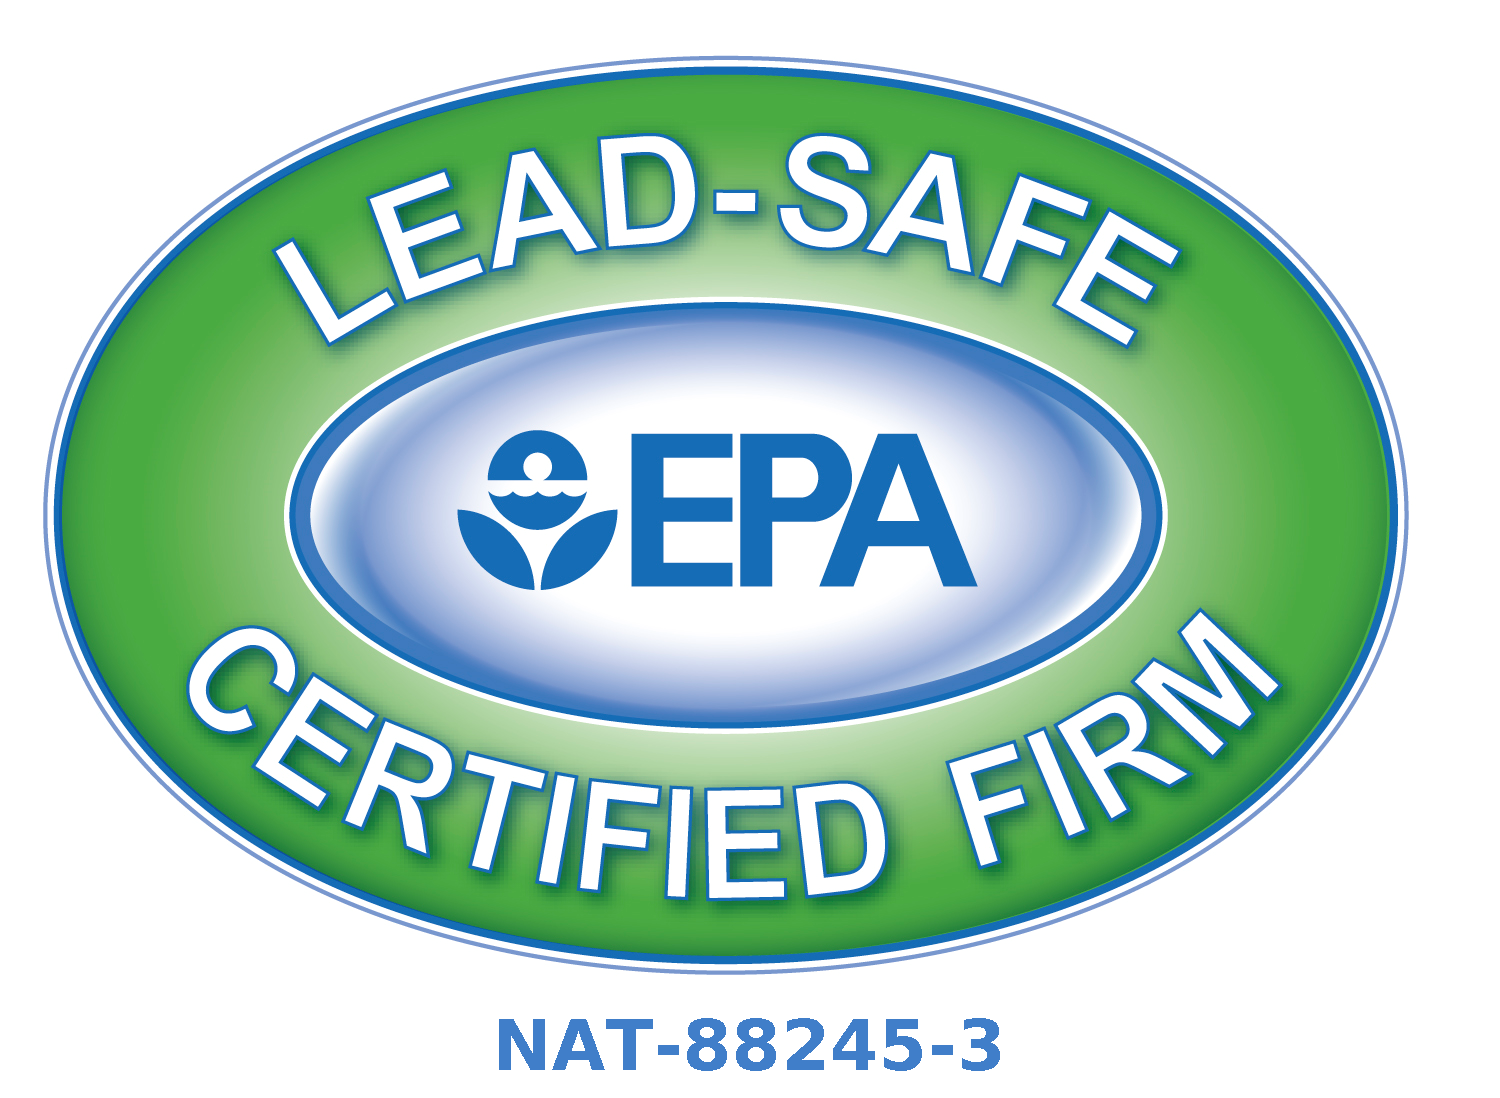 Lead-Safe Certified Firm NAT-88245-3